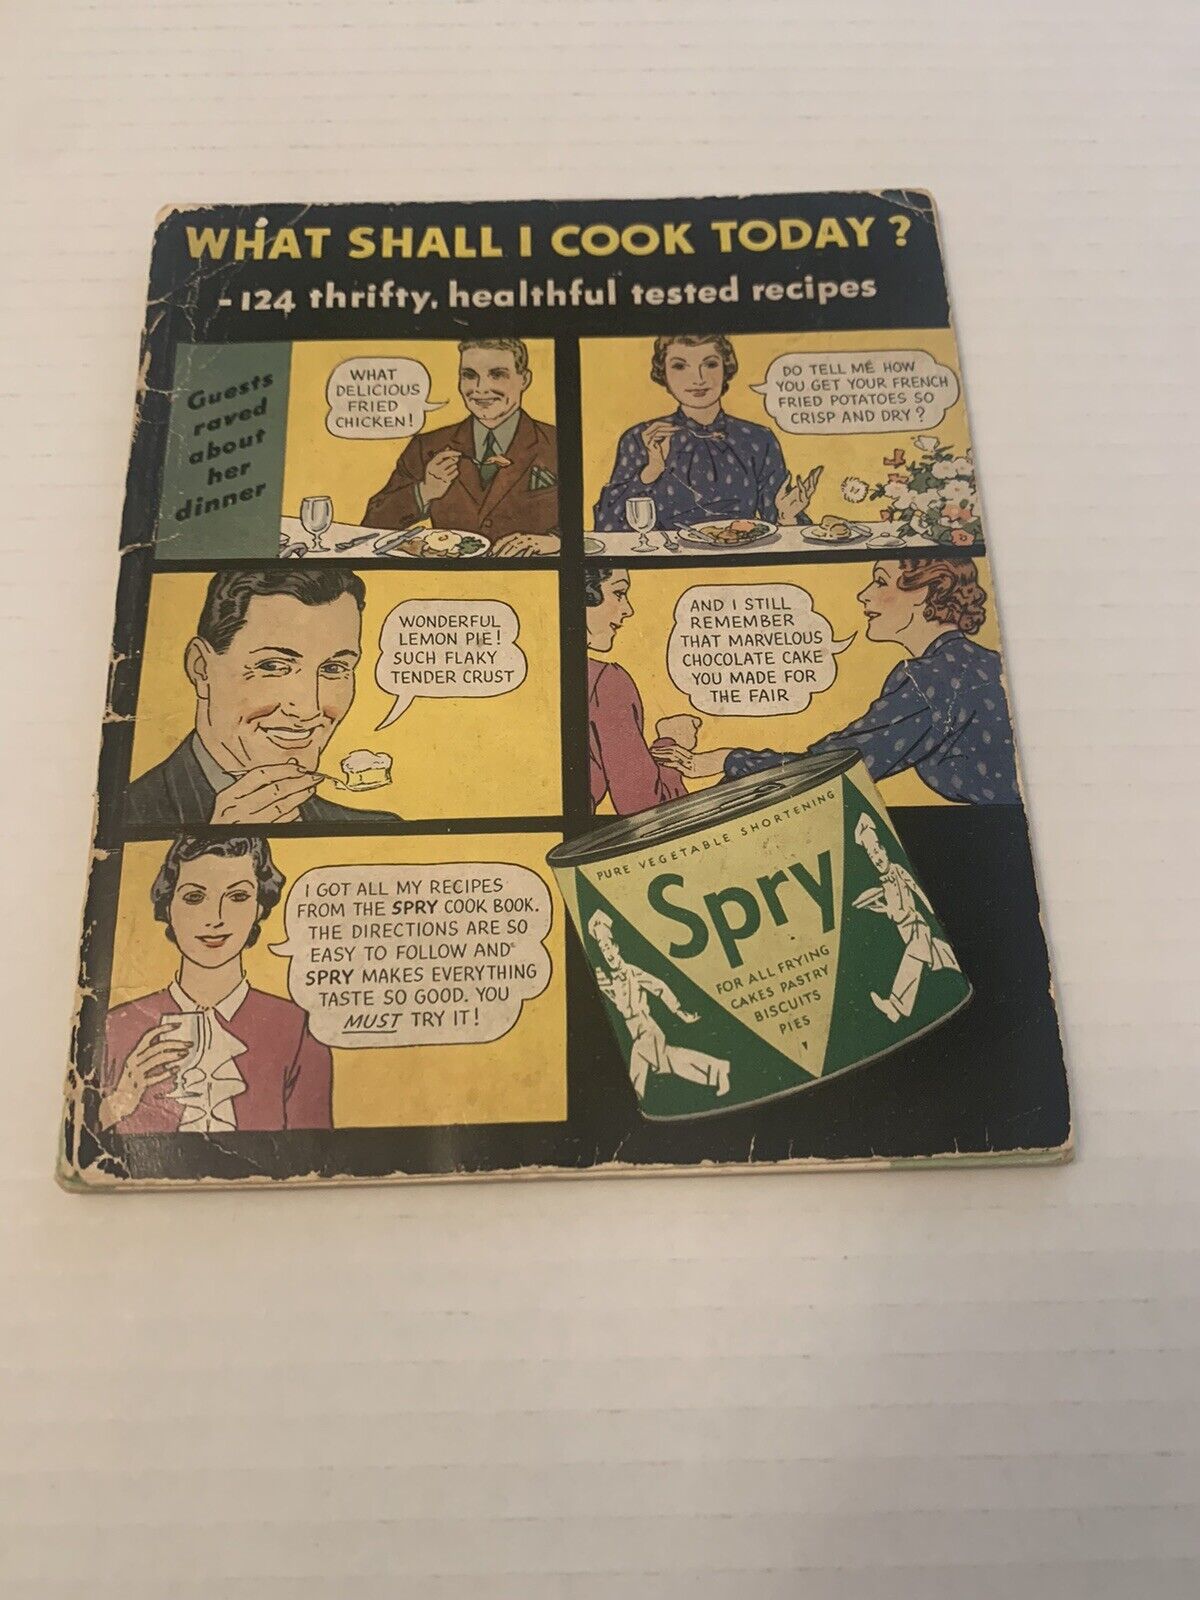 Vintage 1935 Spry Shortening 124 Recipes “What Shall I Cook Today?” 48 Pages